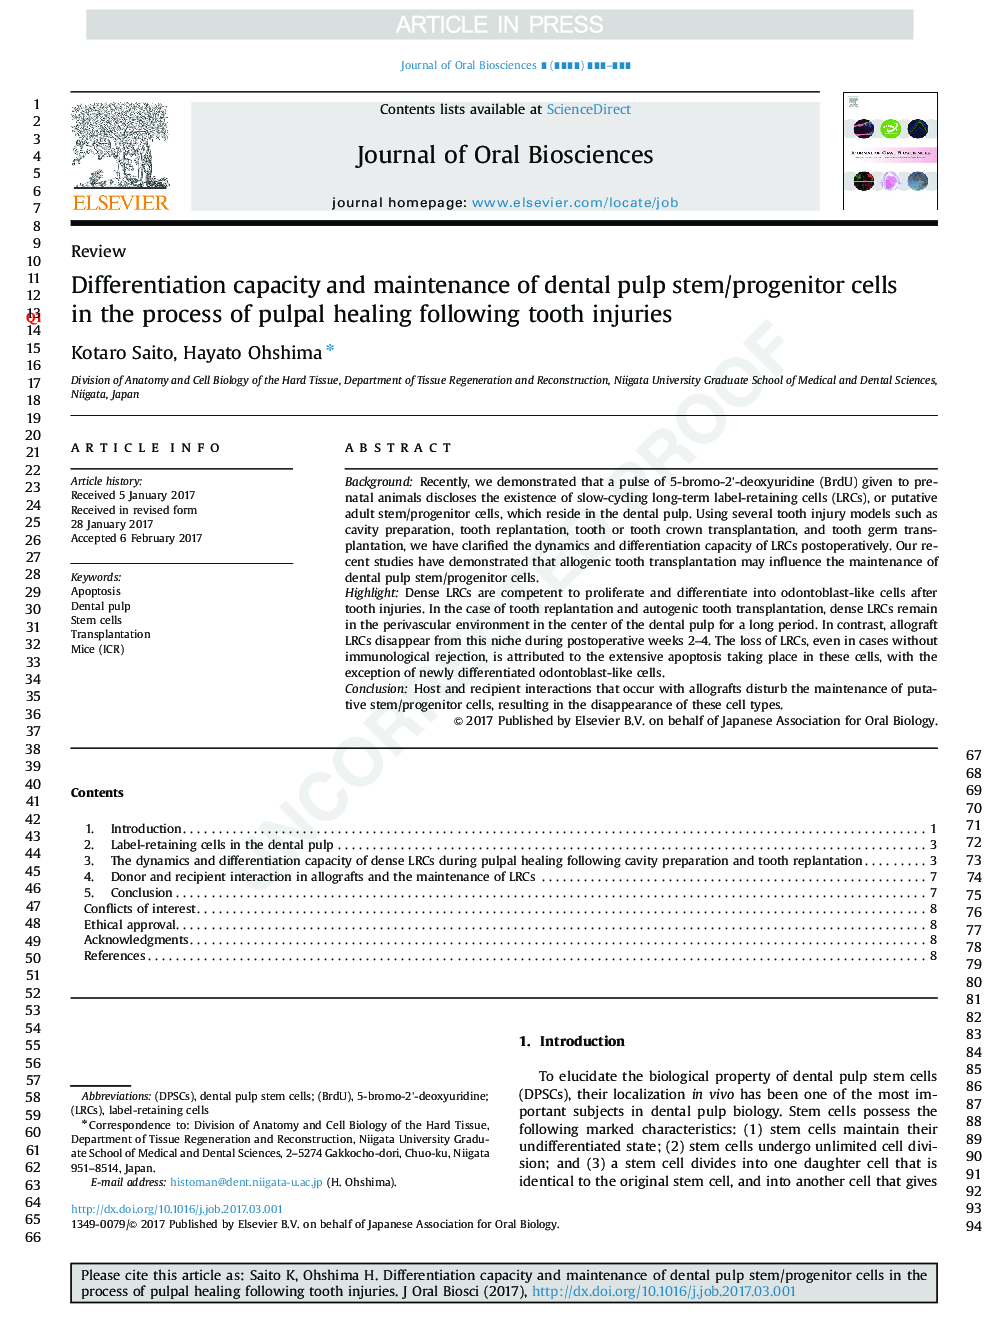 Differentiation capacity and maintenance of dental pulp stem/progenitor cells in the process of pulpal healing following tooth injuries